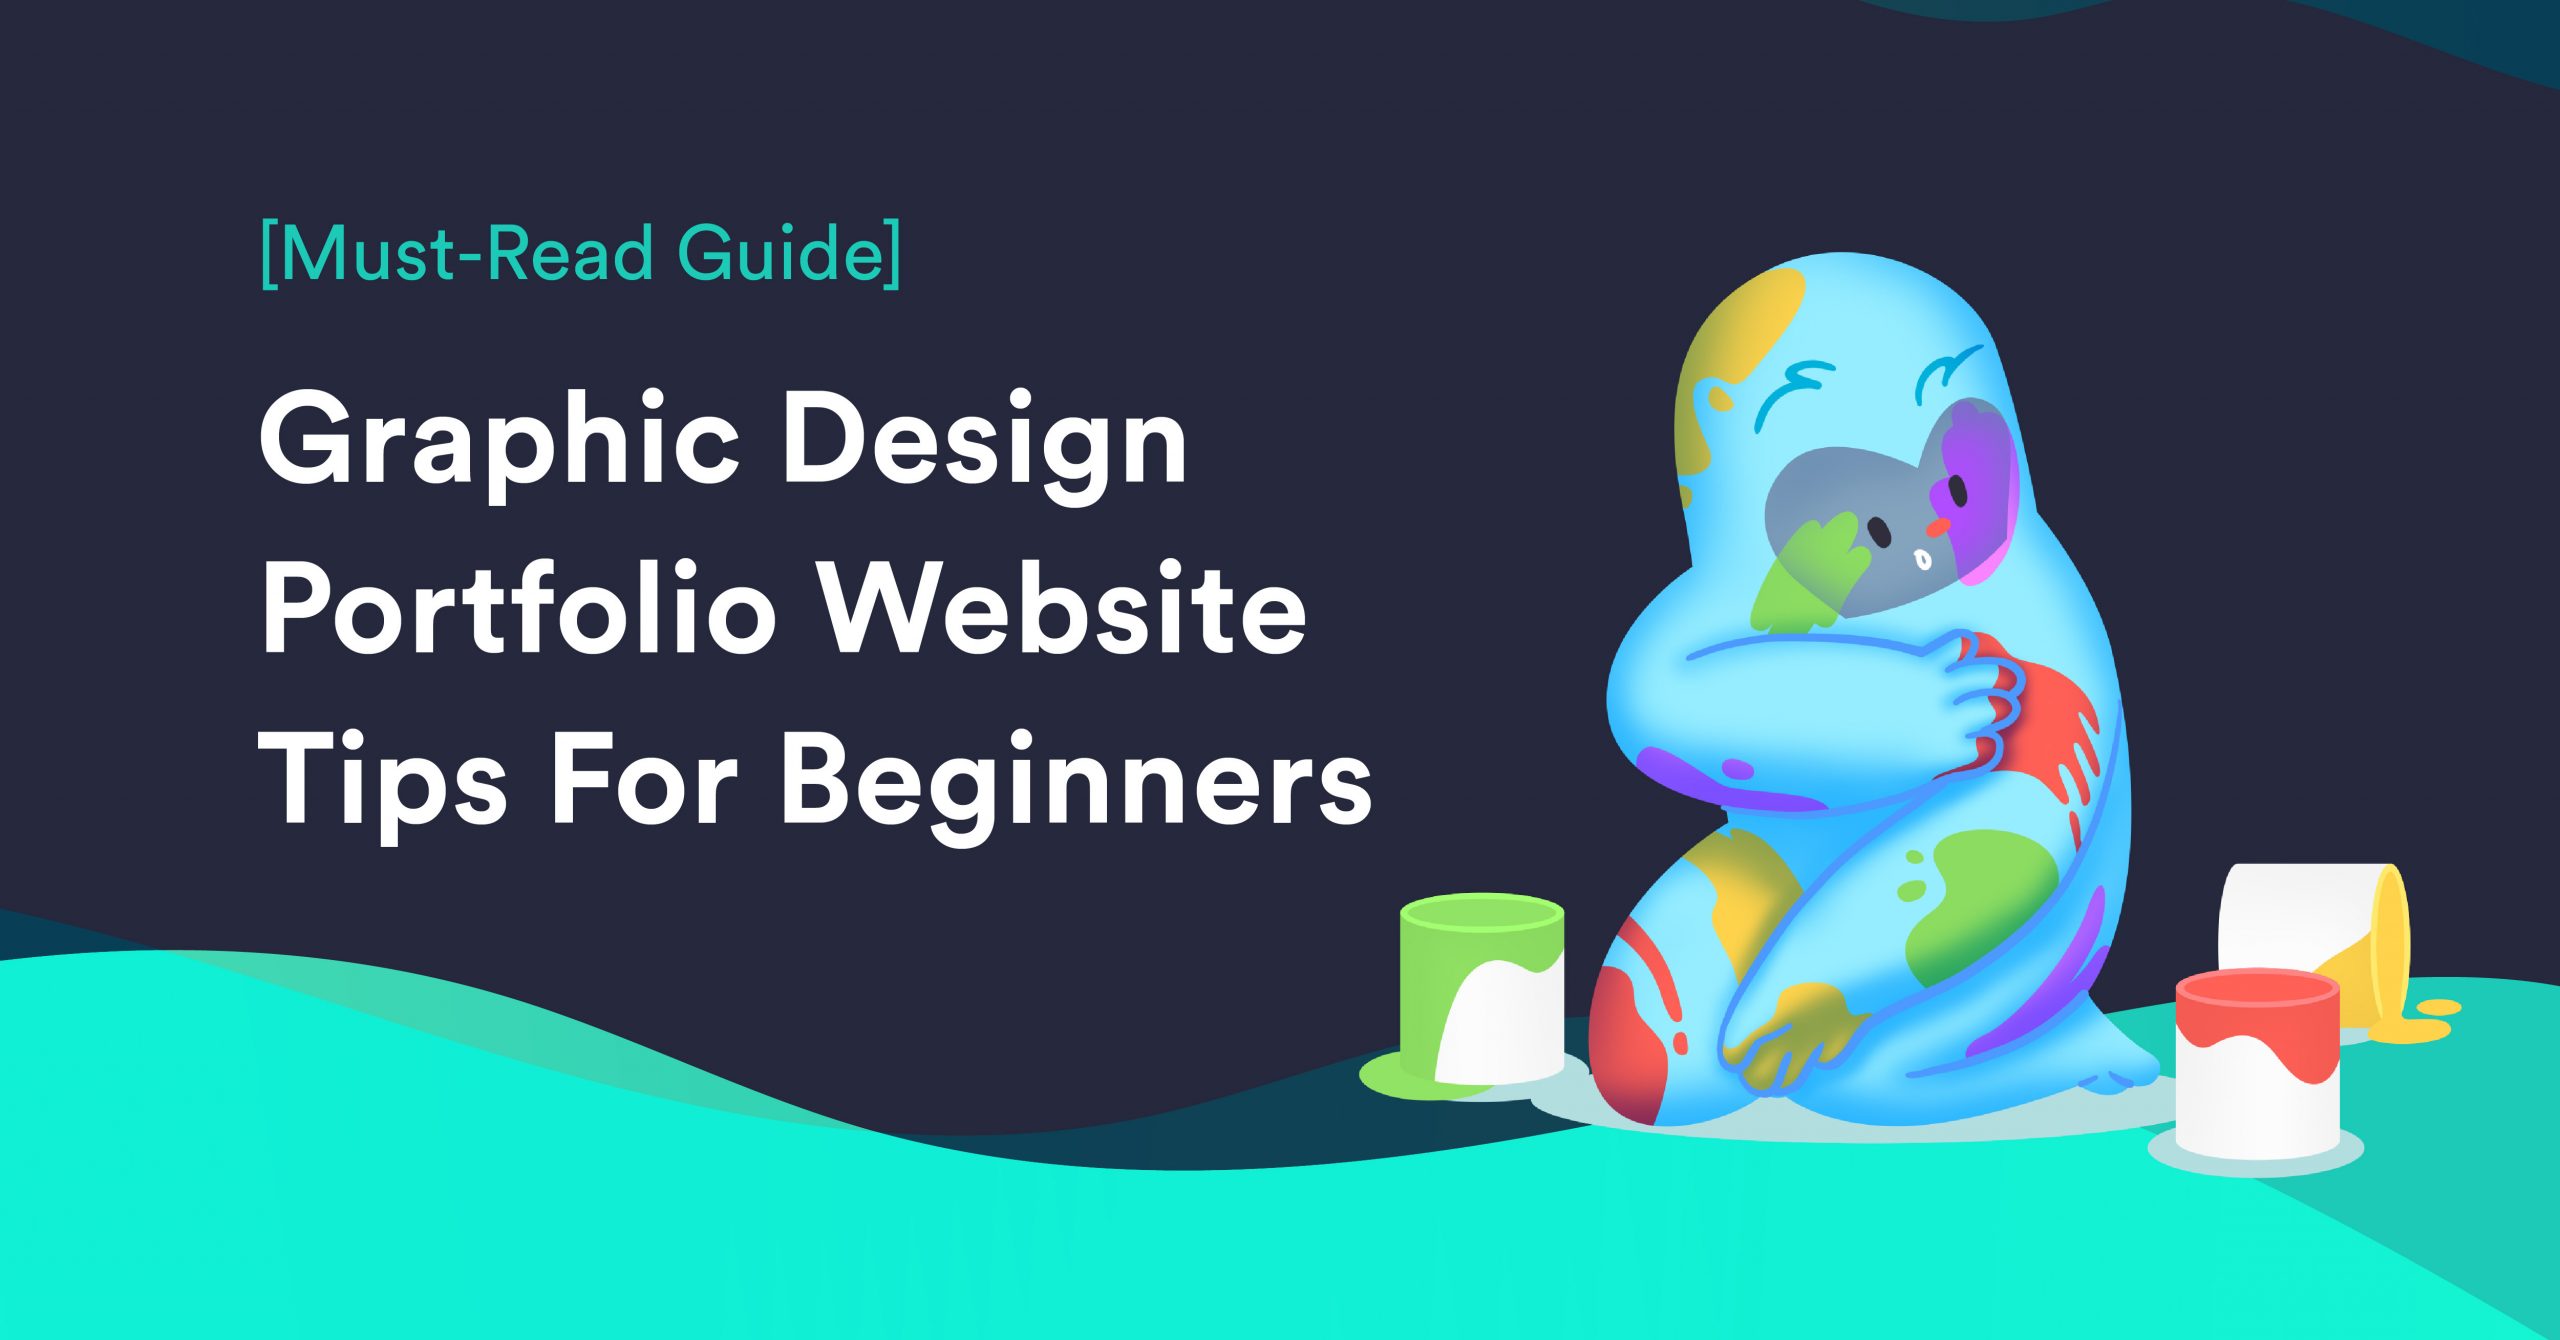 [Must-Read Guide] Graphic Design Portfolio Website Tips For Beginners